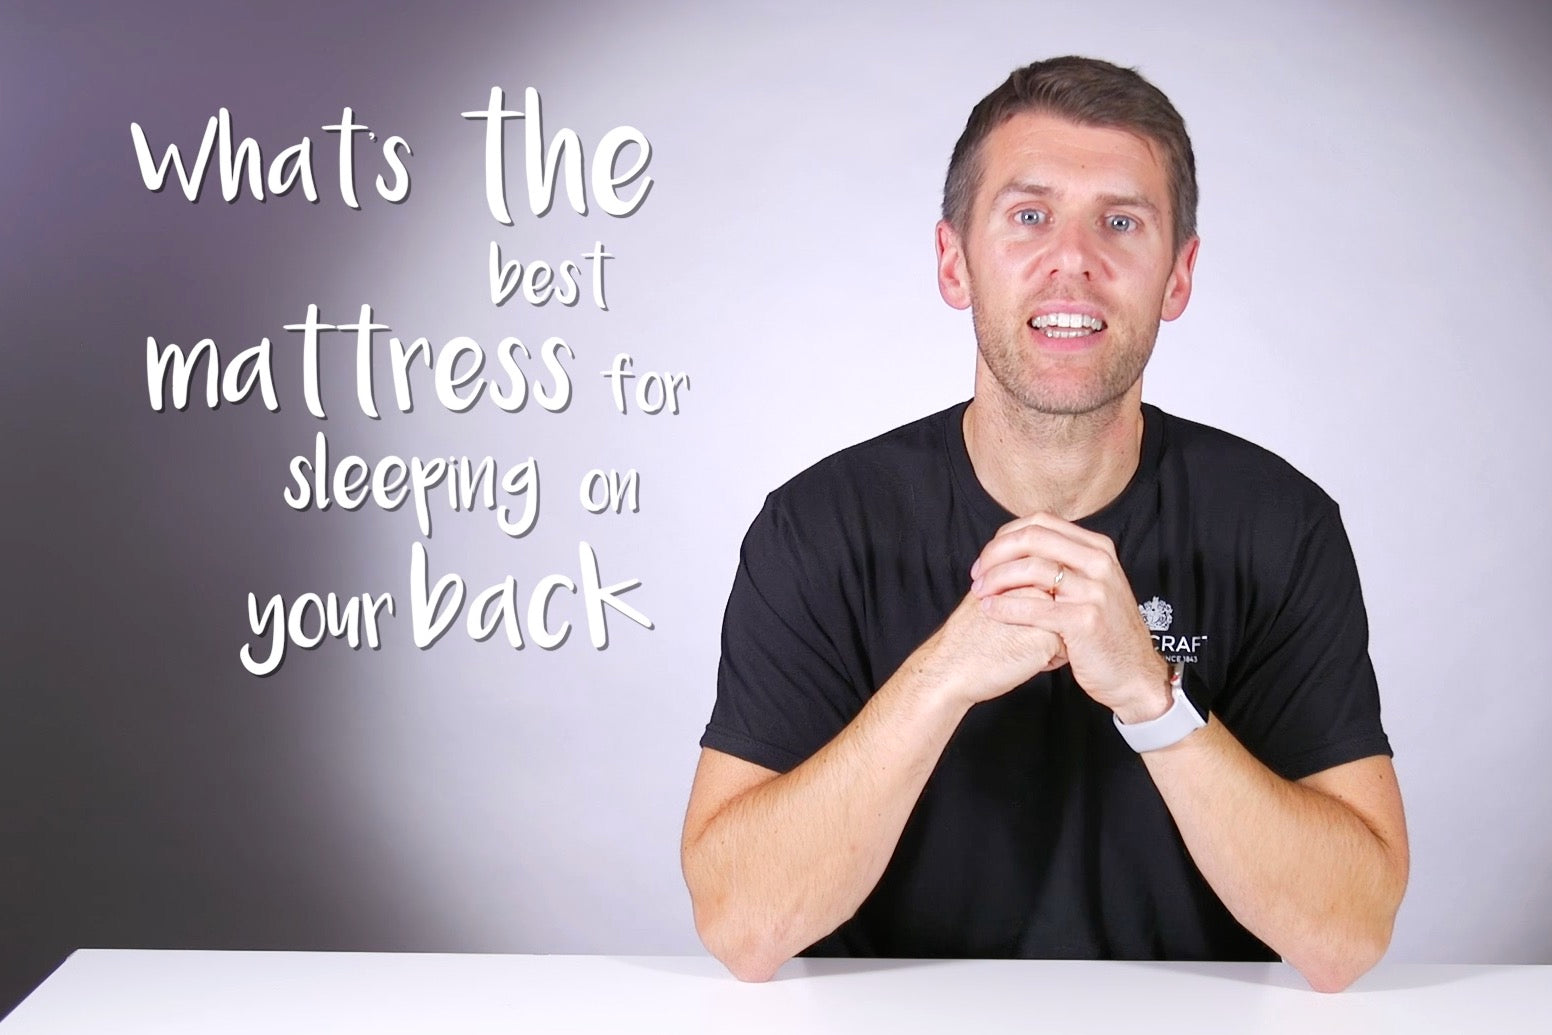 Best mattress for sleeping on your back